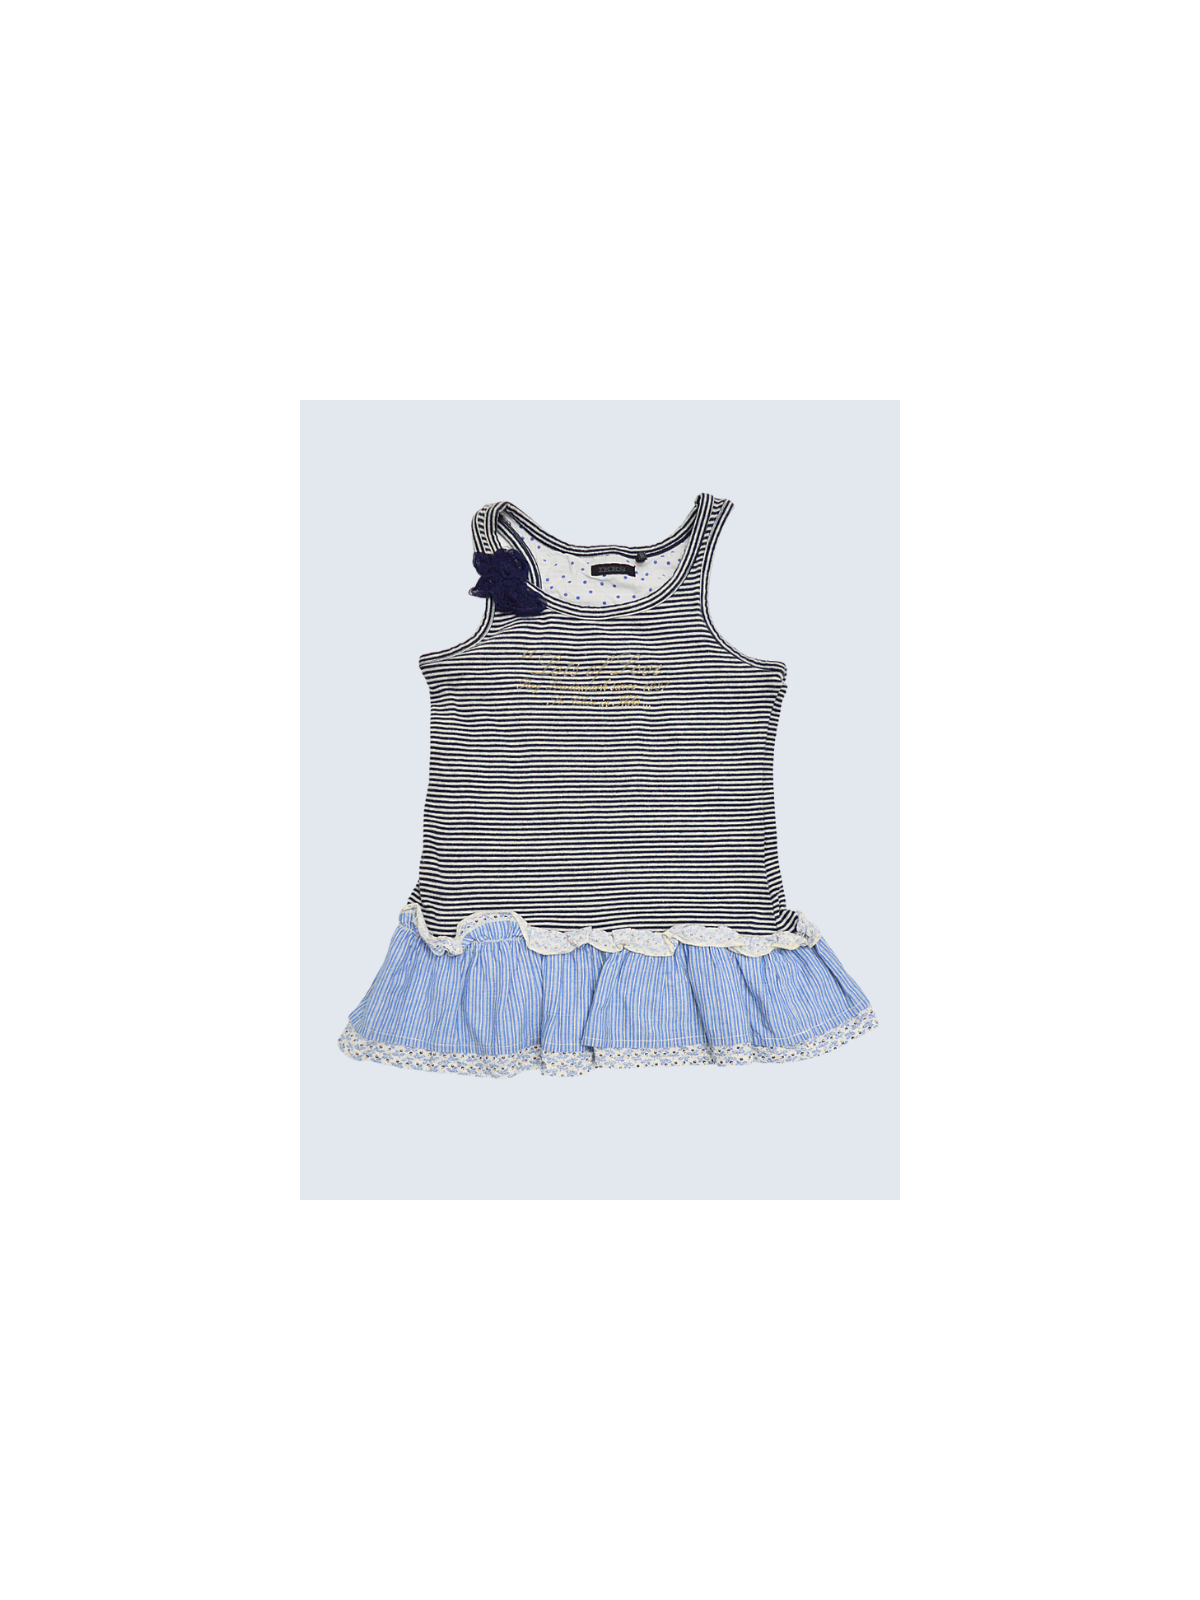 Robe d'occasion IKKS 2 Ans pour fille.